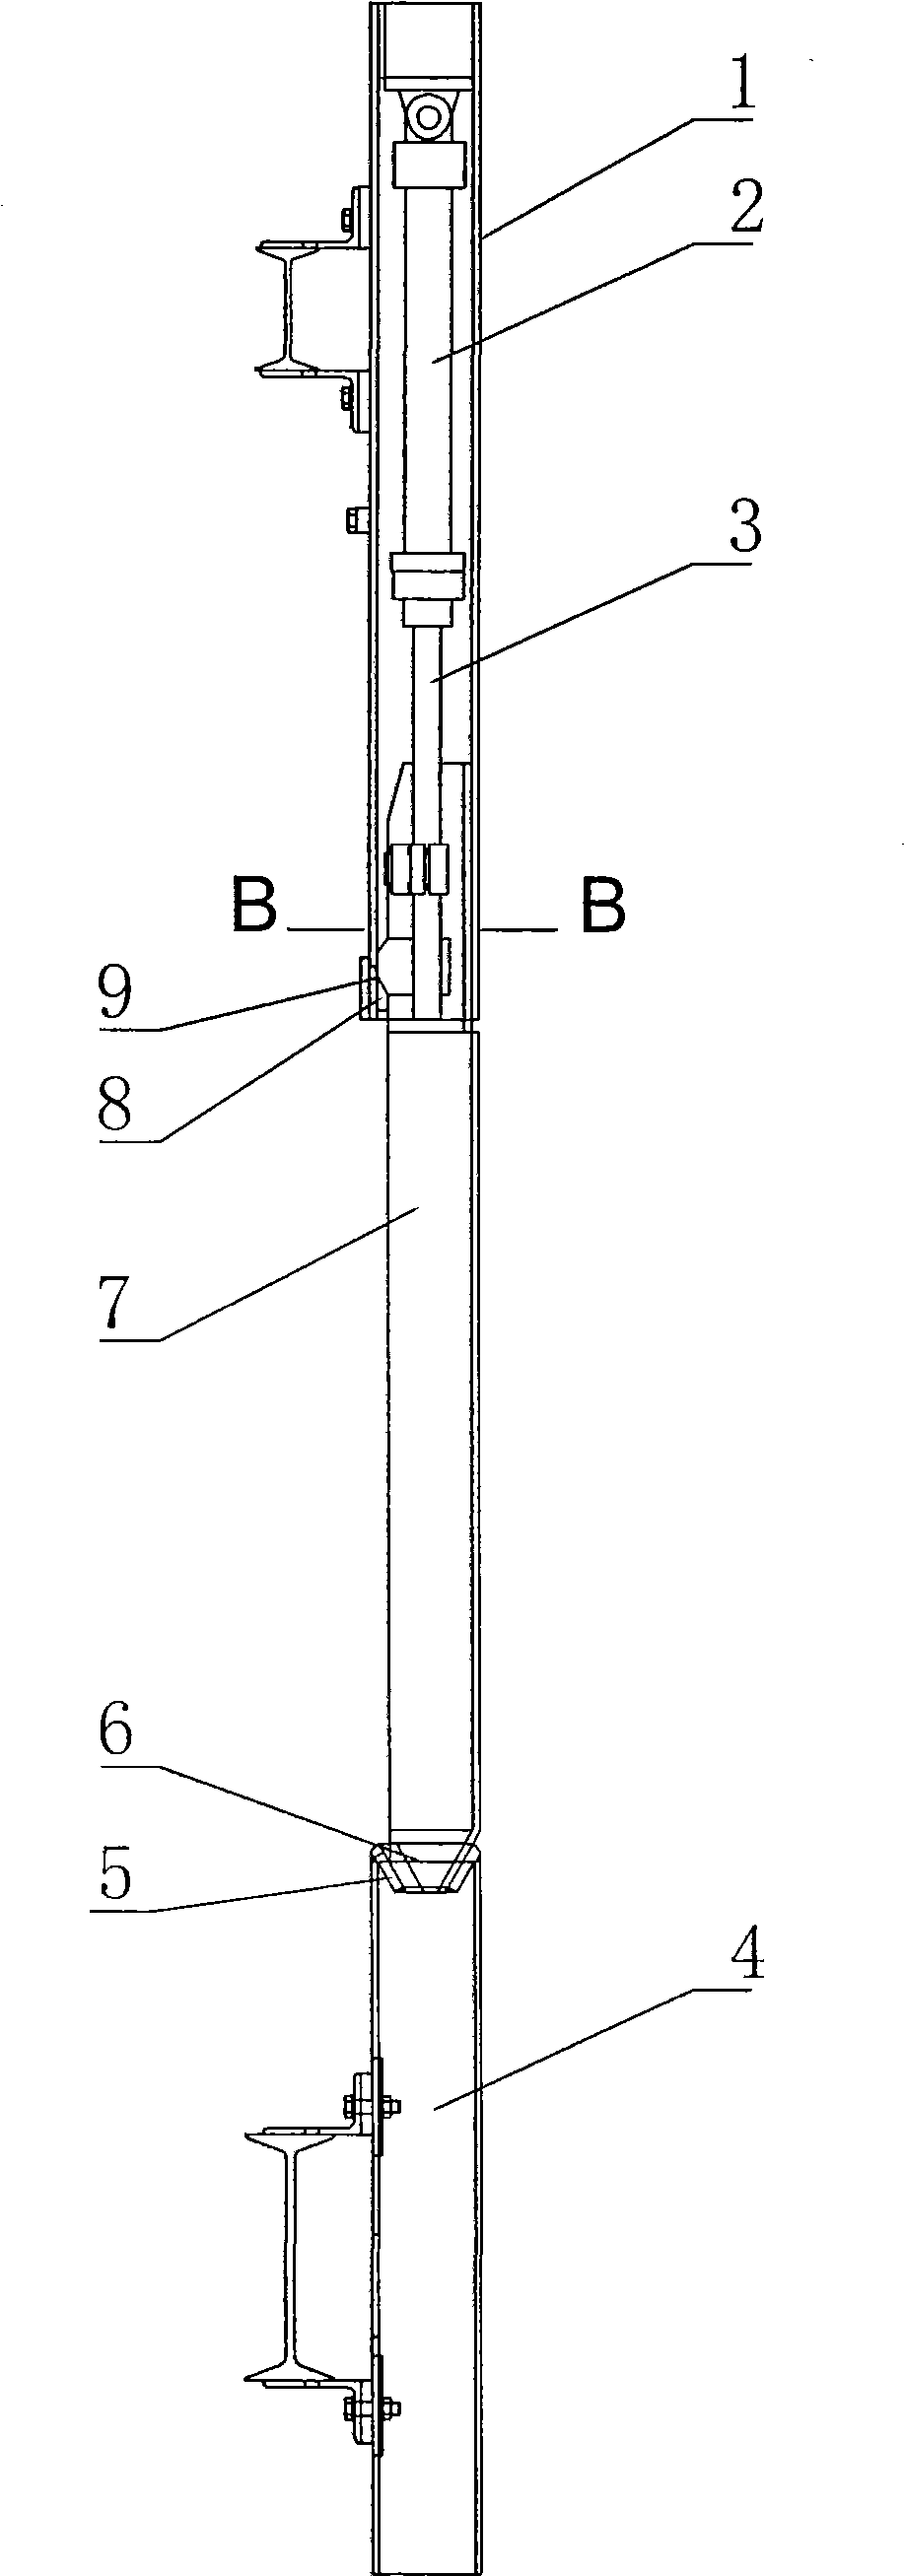 Extension shaft guide used for lifting counter level in mine shaft